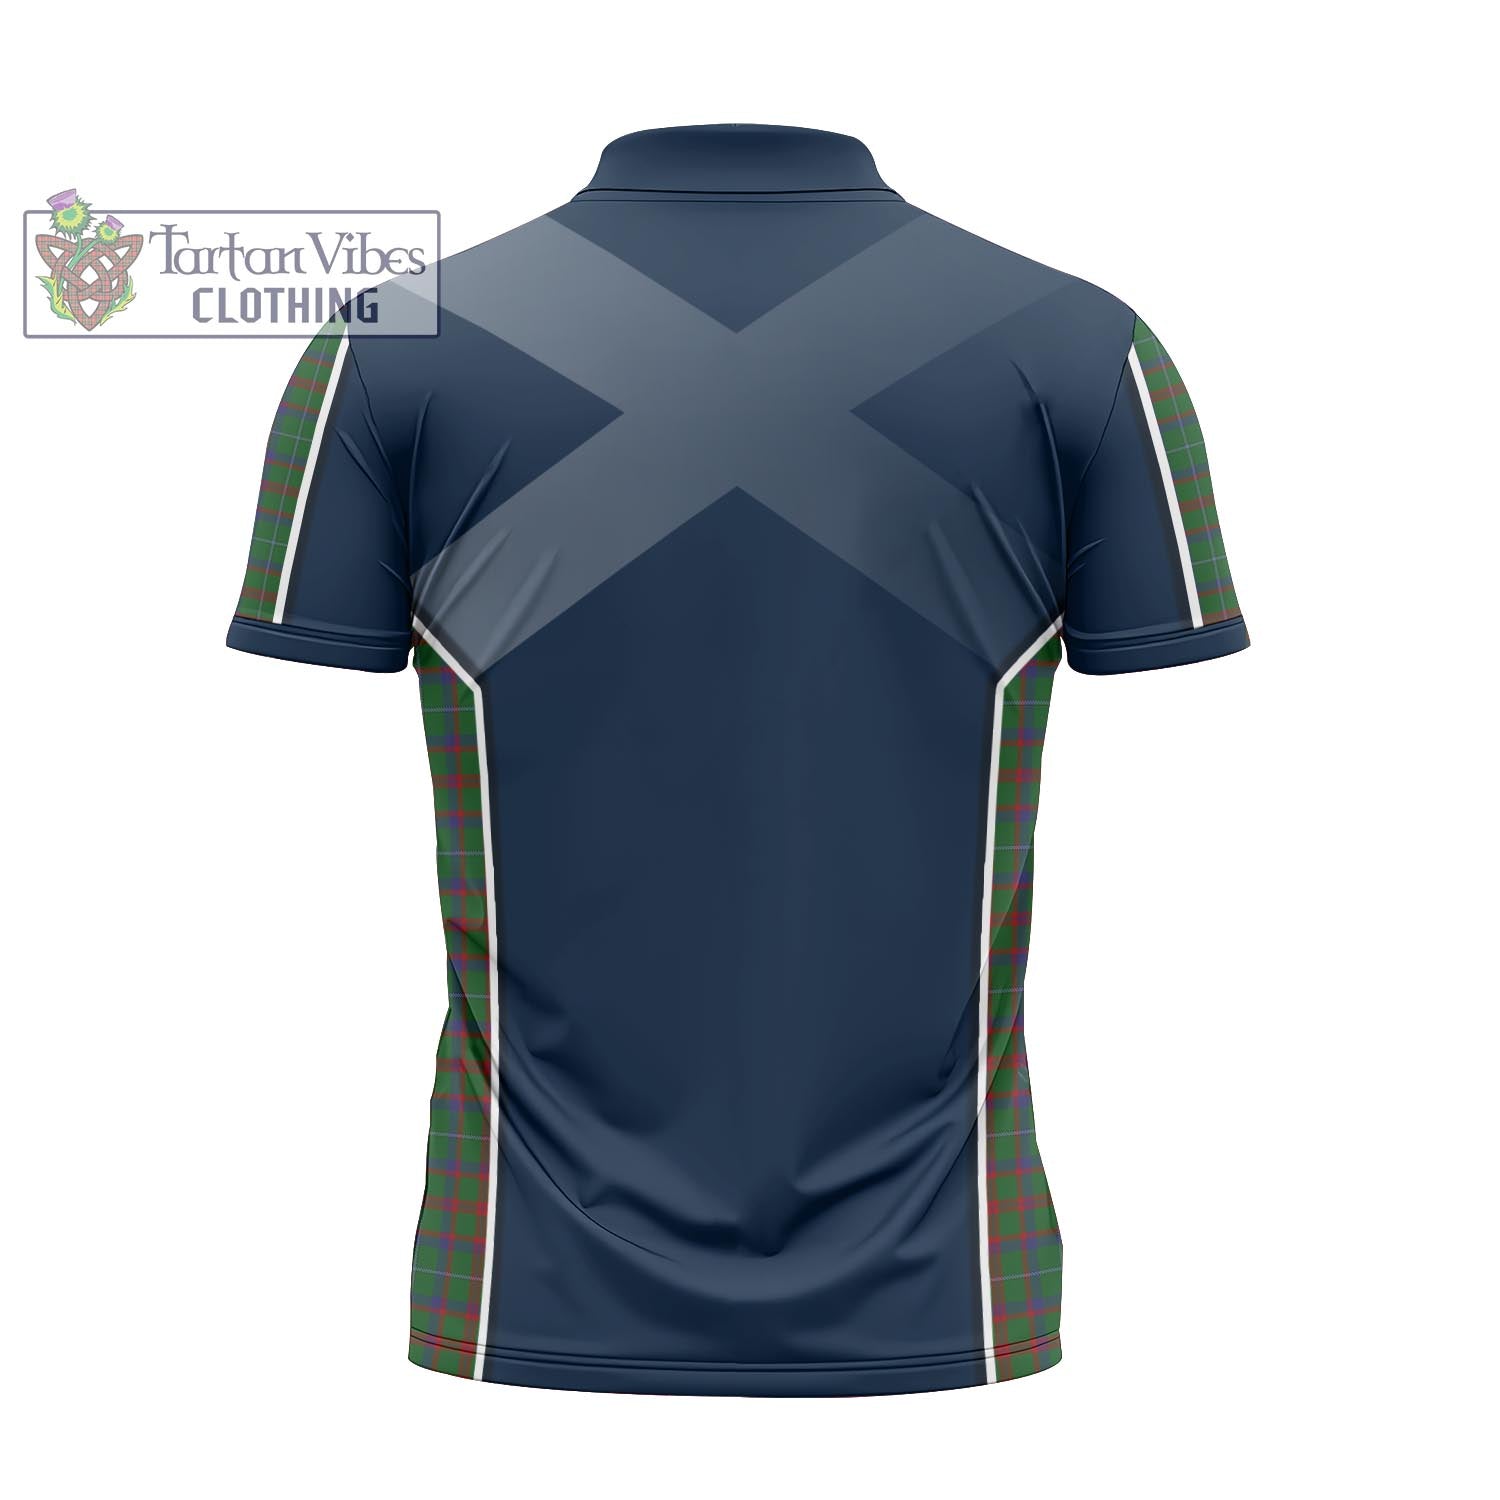 Tartan Vibes Clothing Shaw of Tordarroch Green Hunting Tartan Zipper Polo Shirt with Family Crest and Scottish Thistle Vibes Sport Style